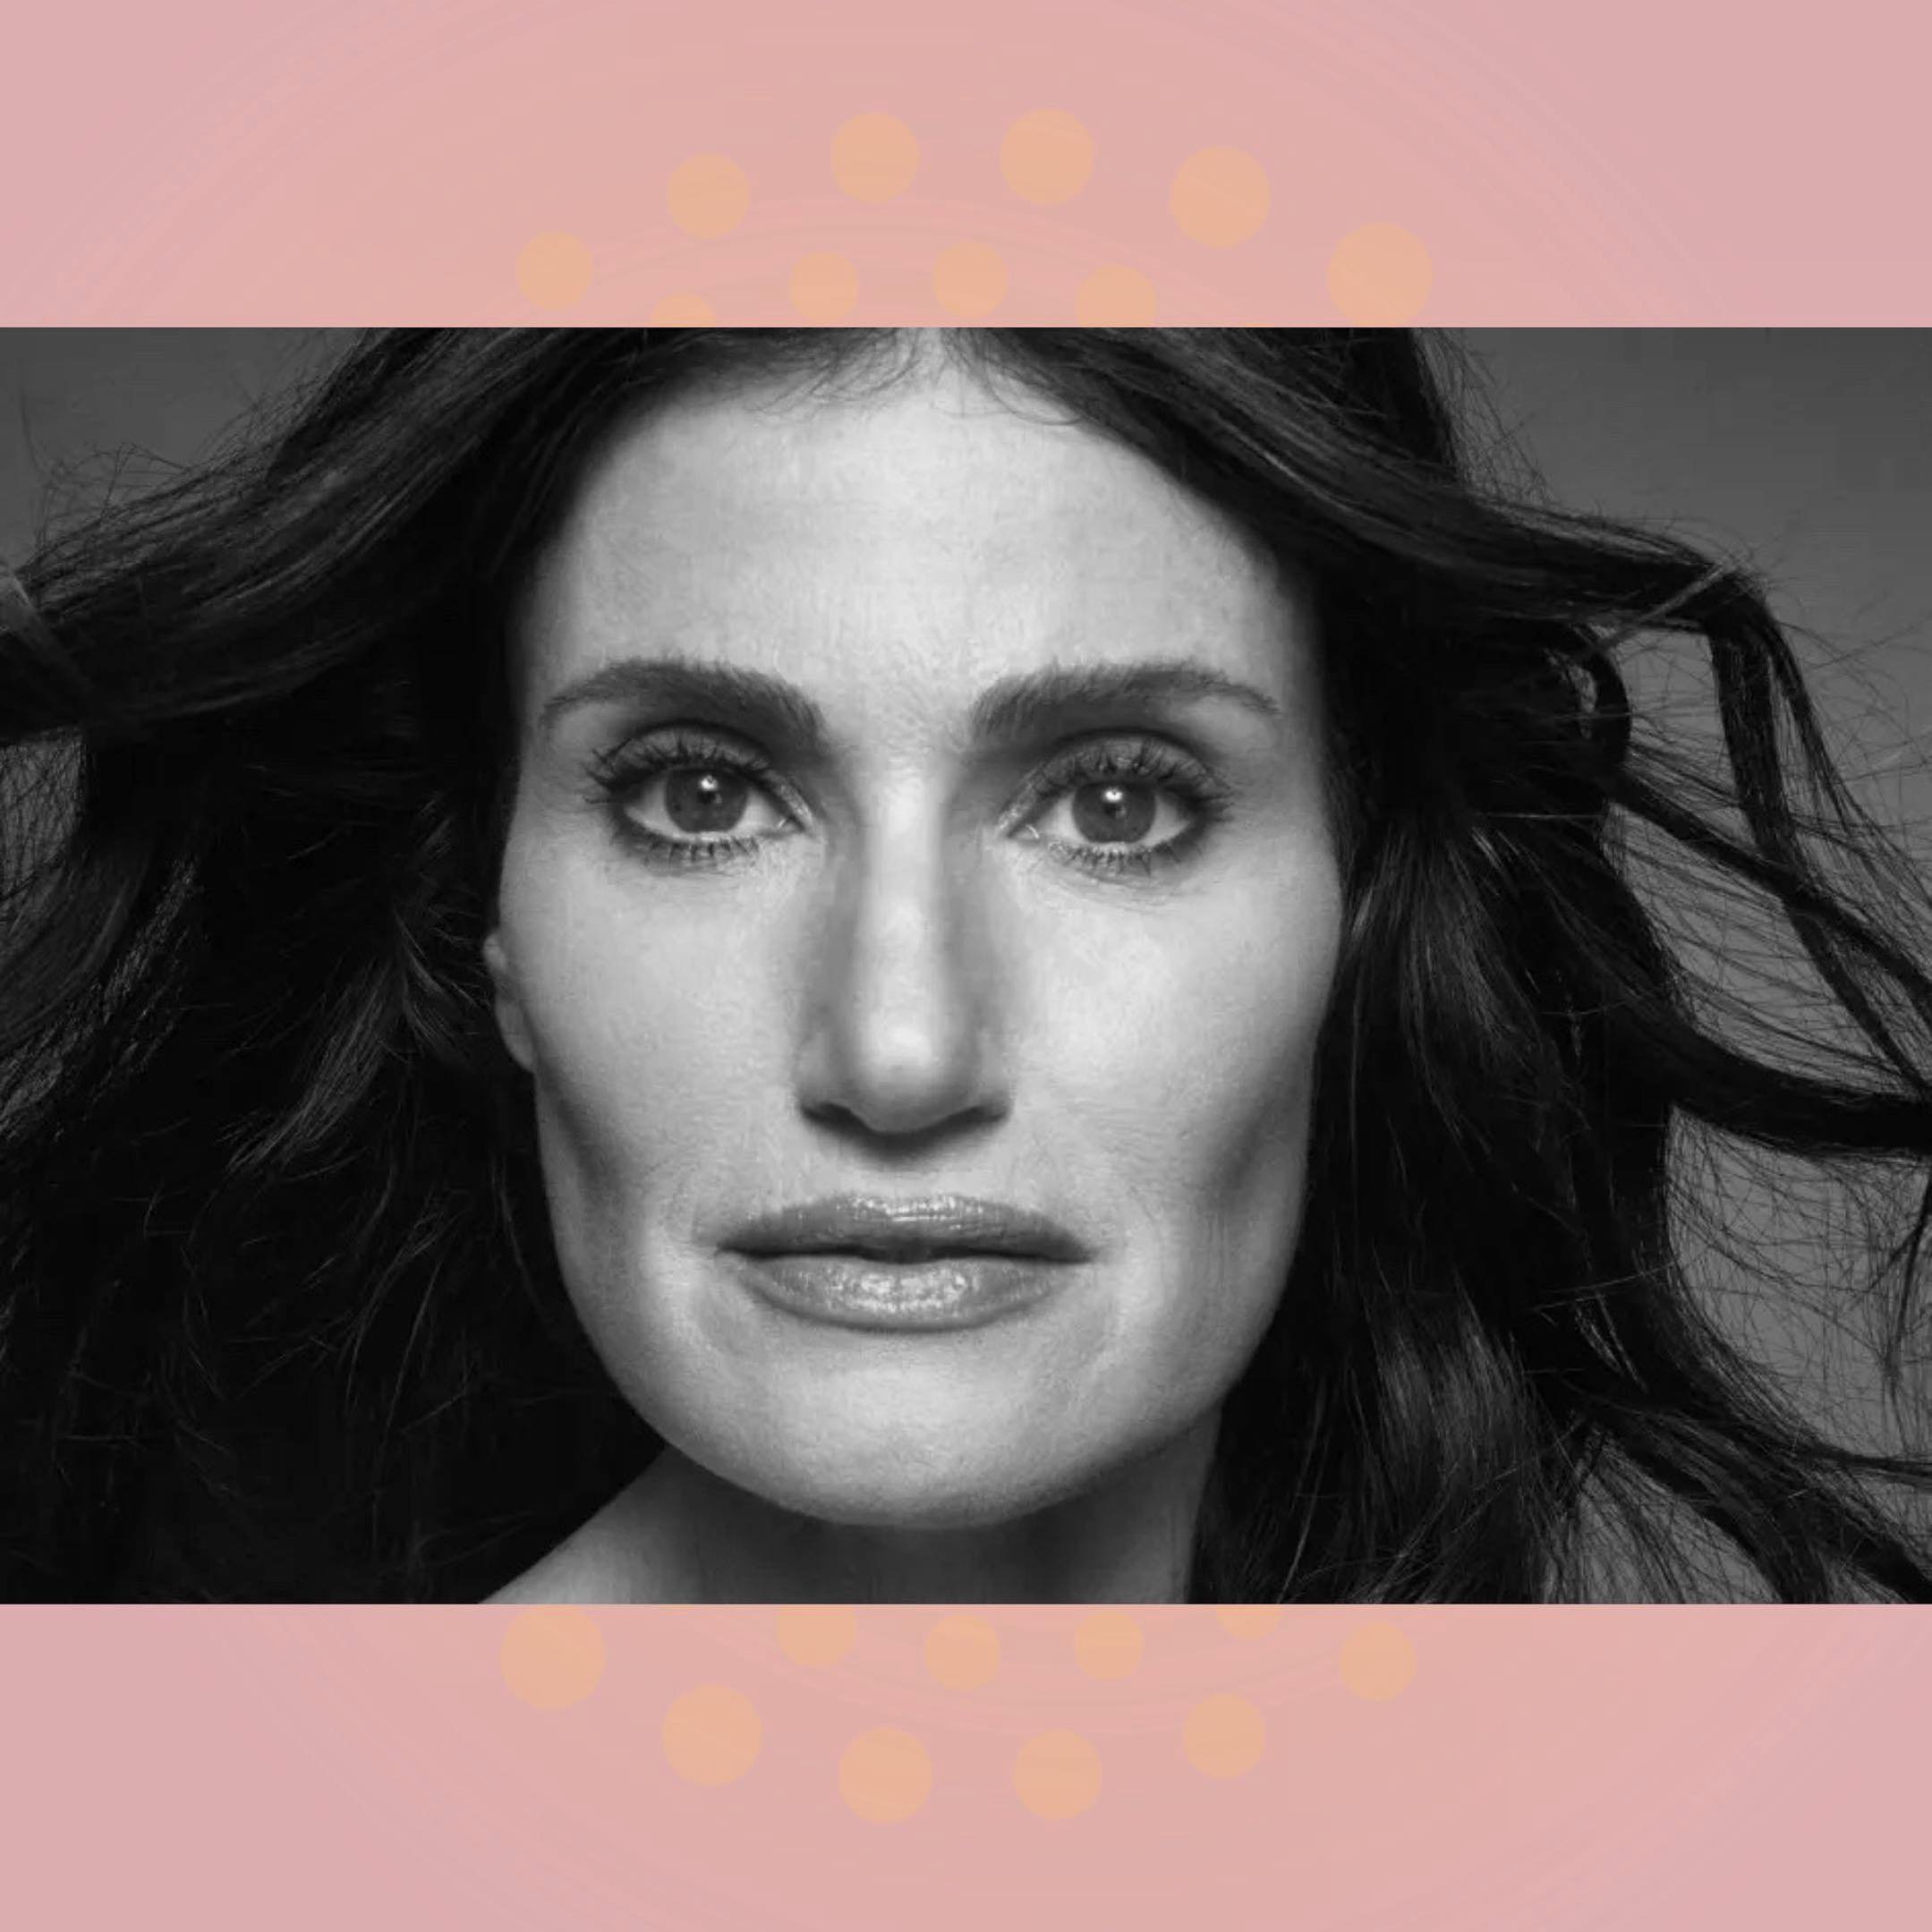 &ldquo;I haven&rsquo;t seen my fans in a long time, and I want to show them how I&rsquo;ve changed, and how I haven&rsquo;t. I want to show them my experiences and hopefully, they&rsquo;ll love me no matter what.&rdquo; 
📸 @billboard 

Idina Menzel 